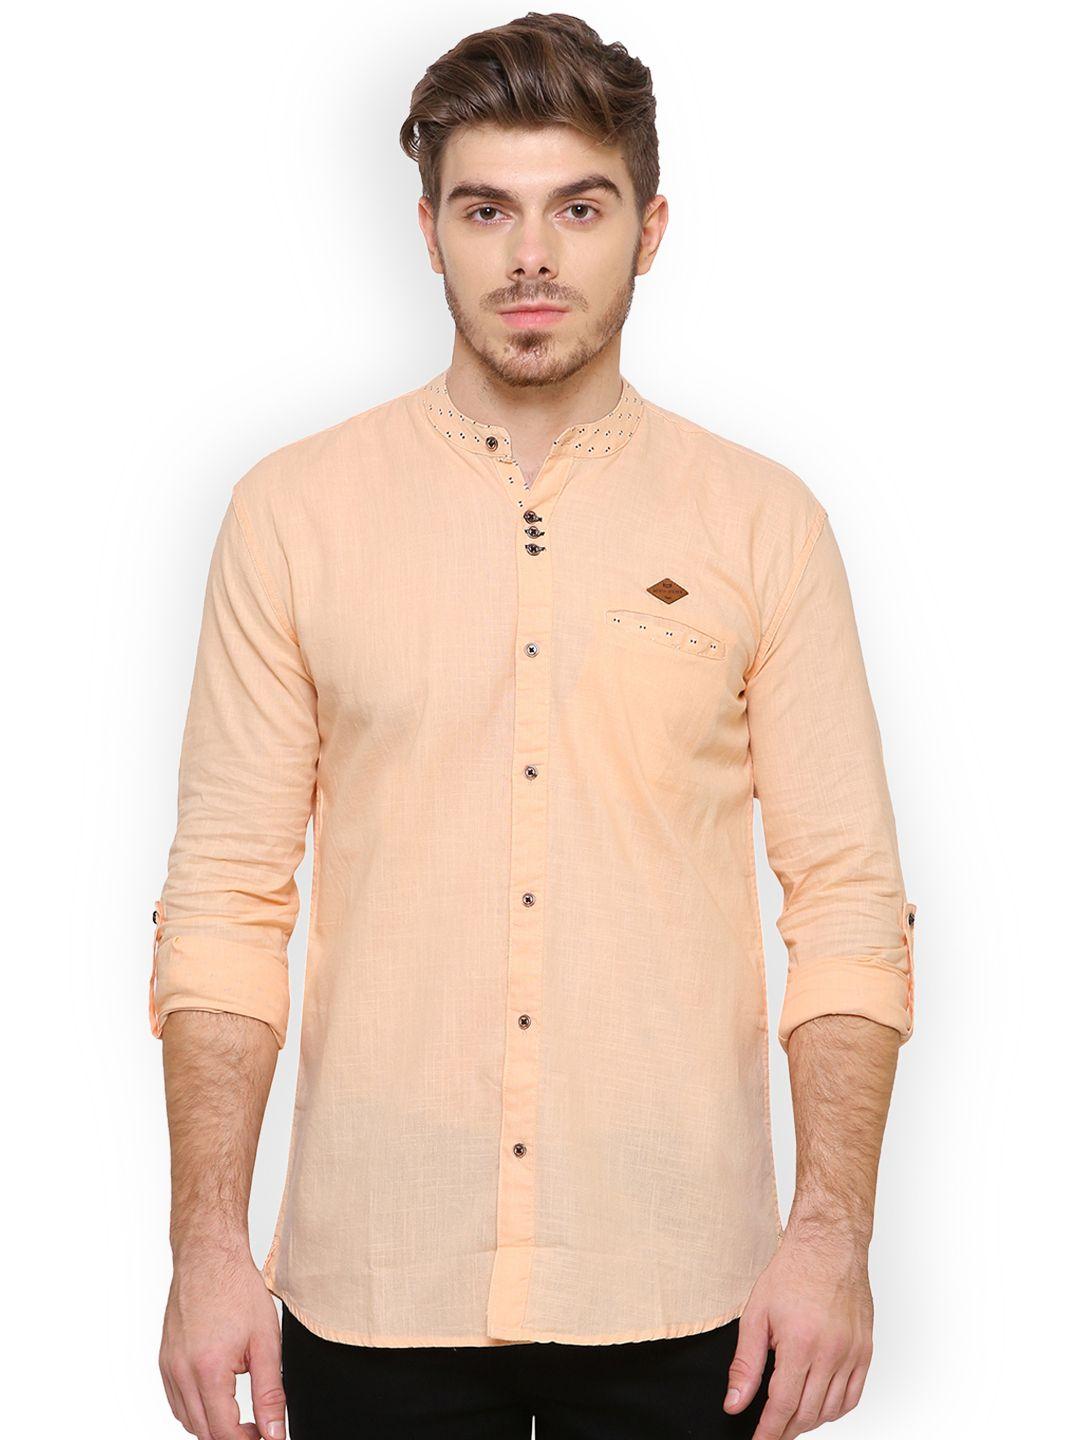 kuons-avenue-men-peach-coloured-smart-slim-fit-solid-casual-shirt